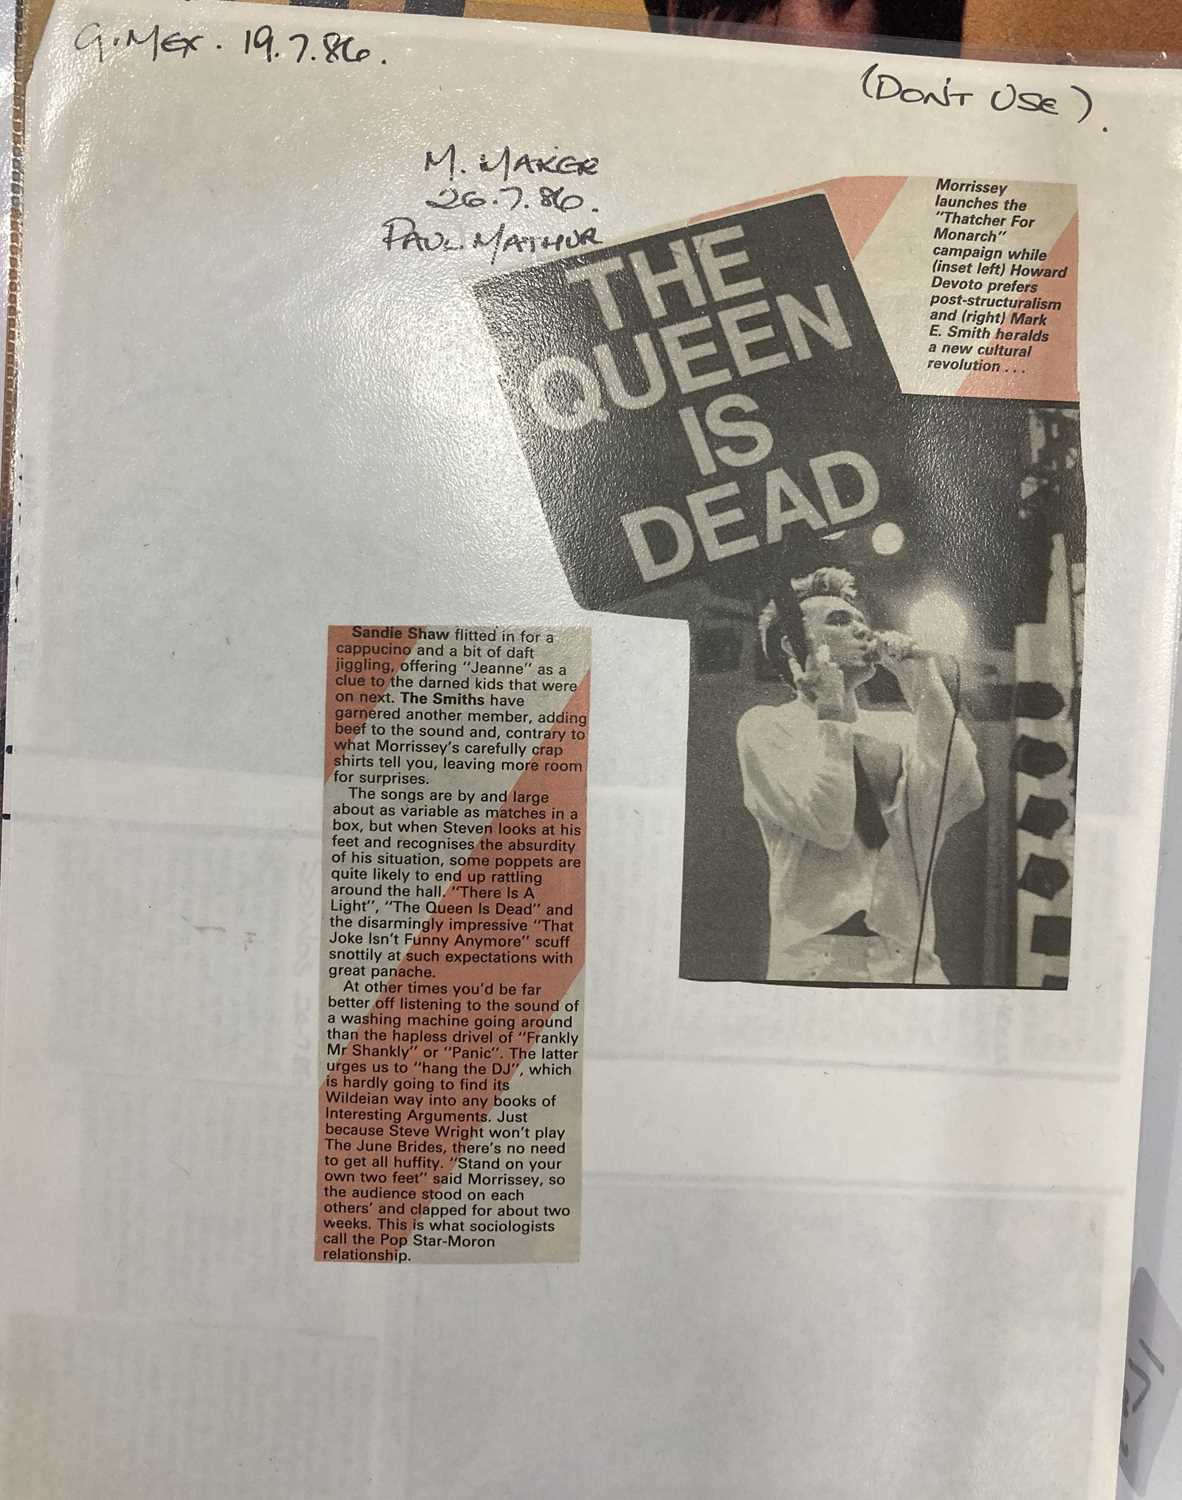 SMITHS PRESS CUTTINGS ARCHIVE - Image 12 of 16